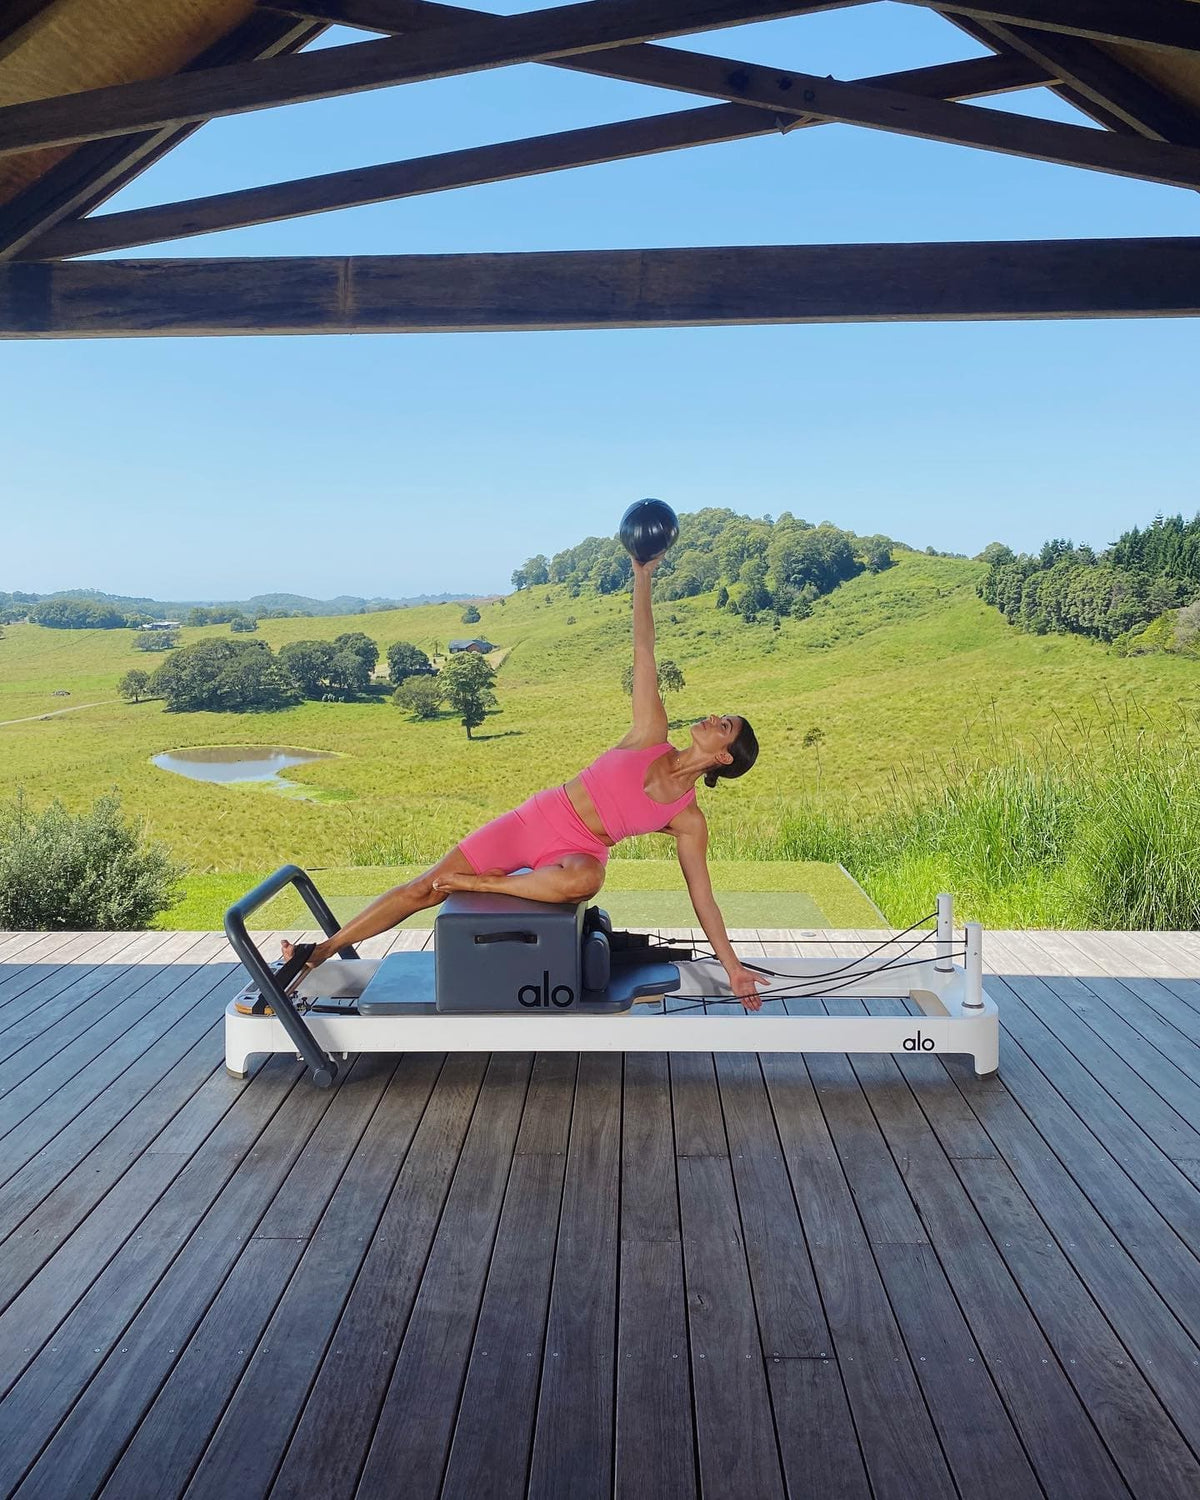 @biancamelas wearing an Airbrush Real Bra Tank with a pair of matching High Waist Biker Shorts in Pink Fuchsia while doing Pilates on a reformer with an exercise ball in a vast prairie landscape.  